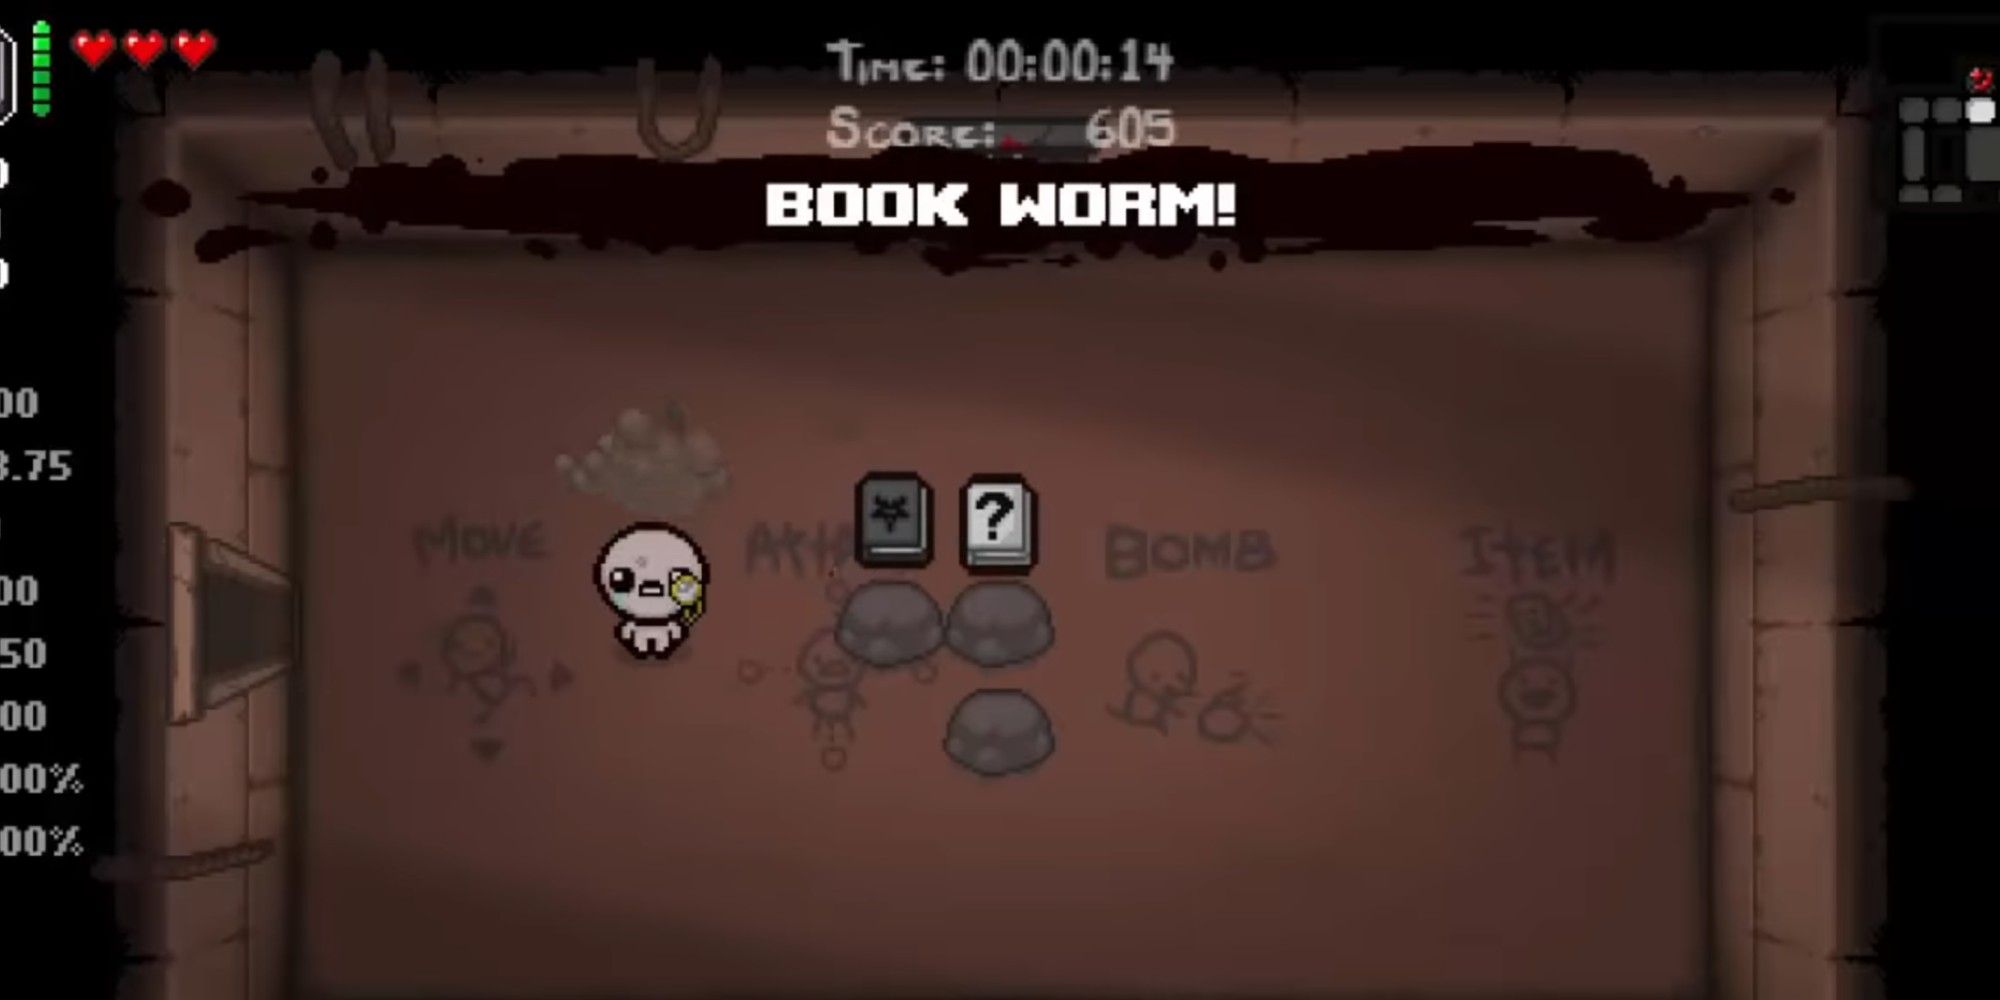 The Binding of Isaac bookworm Transformation